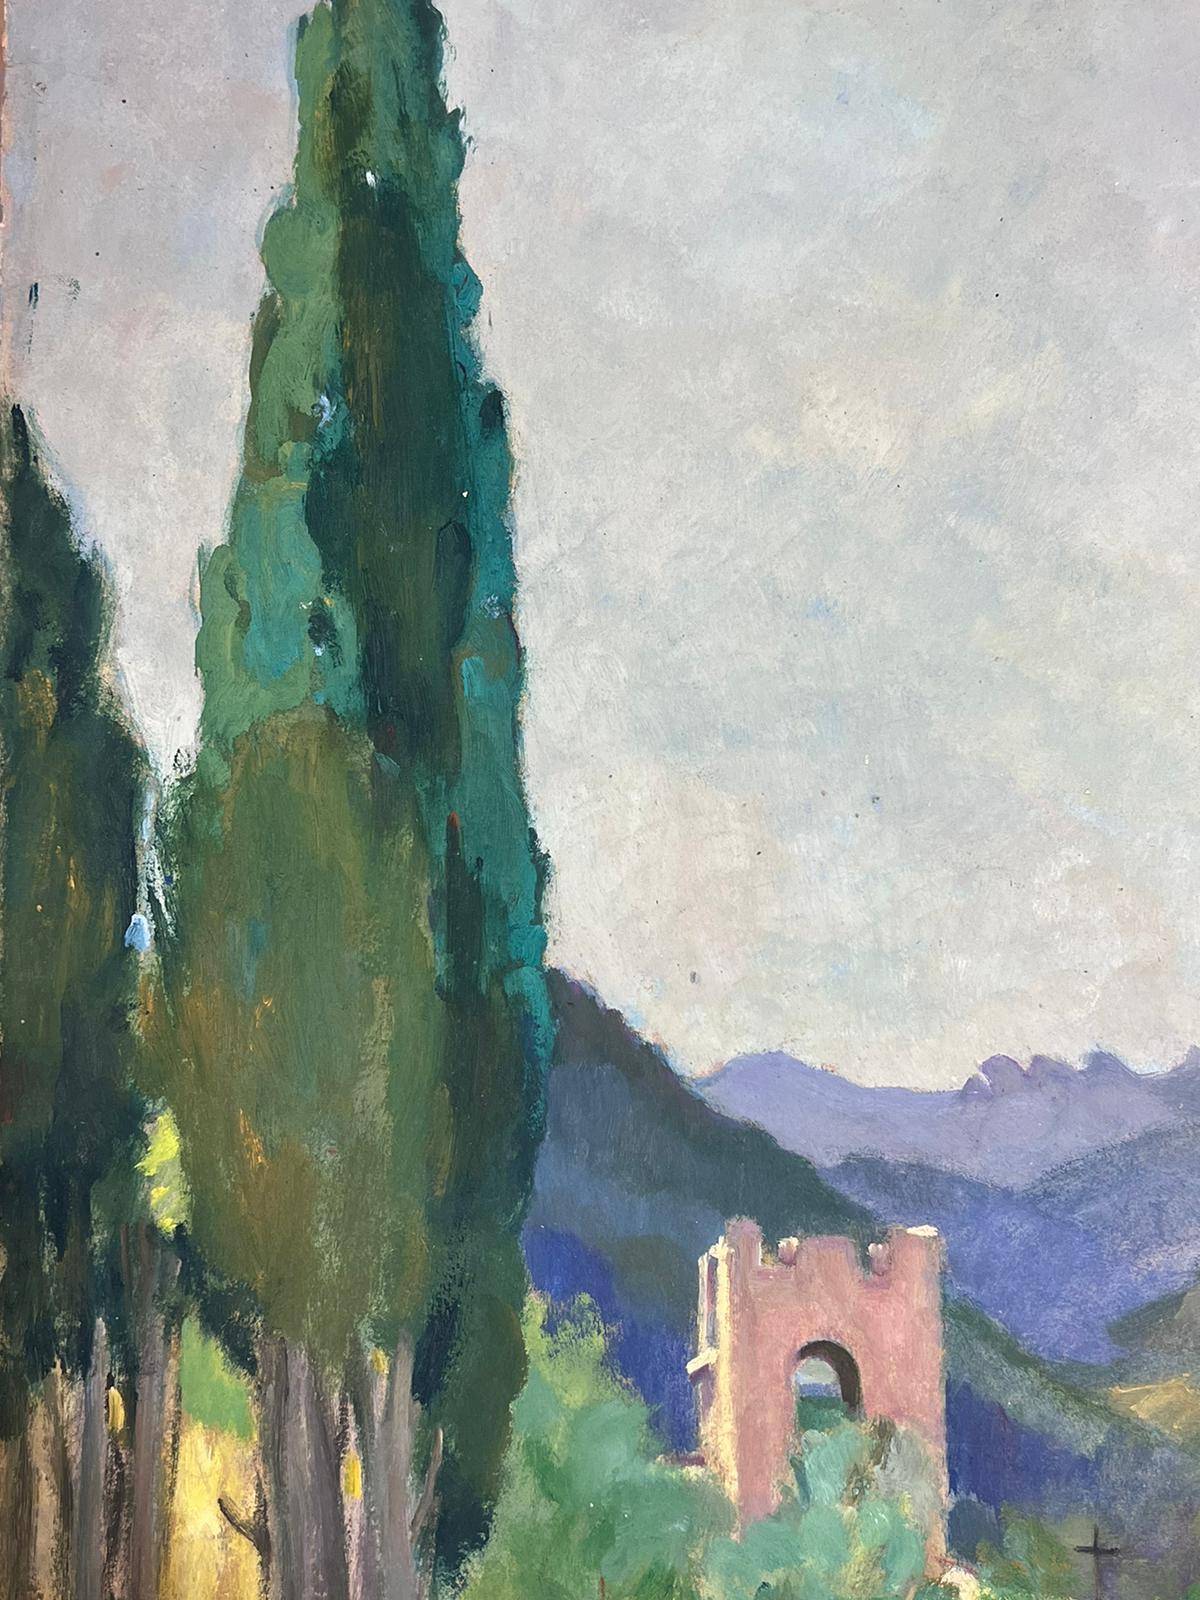 French Landscape
signed by Louise Alix, French 1950's Impressionist 
oil on artist paper, unframed
painting: 22 x 15.5 inches
provenance: from a large private collection of this artists work in Northern France
condition: original, good and sound